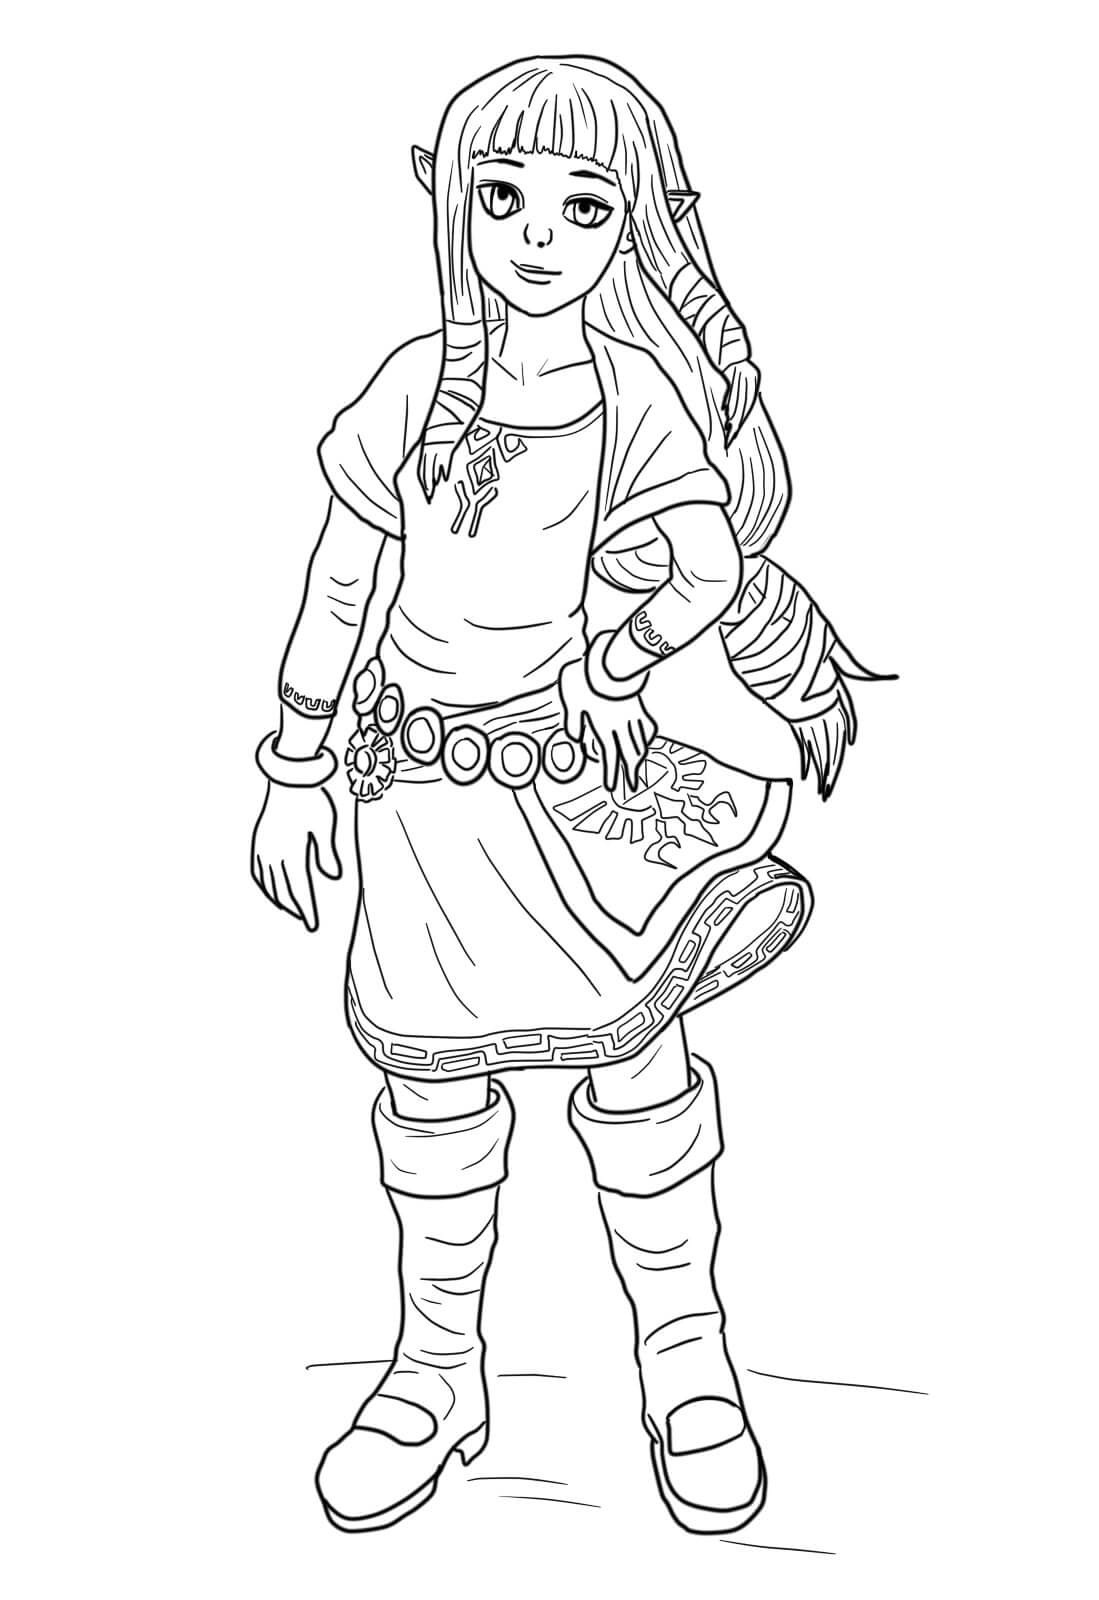 Young Zelda Coloring Page - Free Printable Coloring Pages for Kids